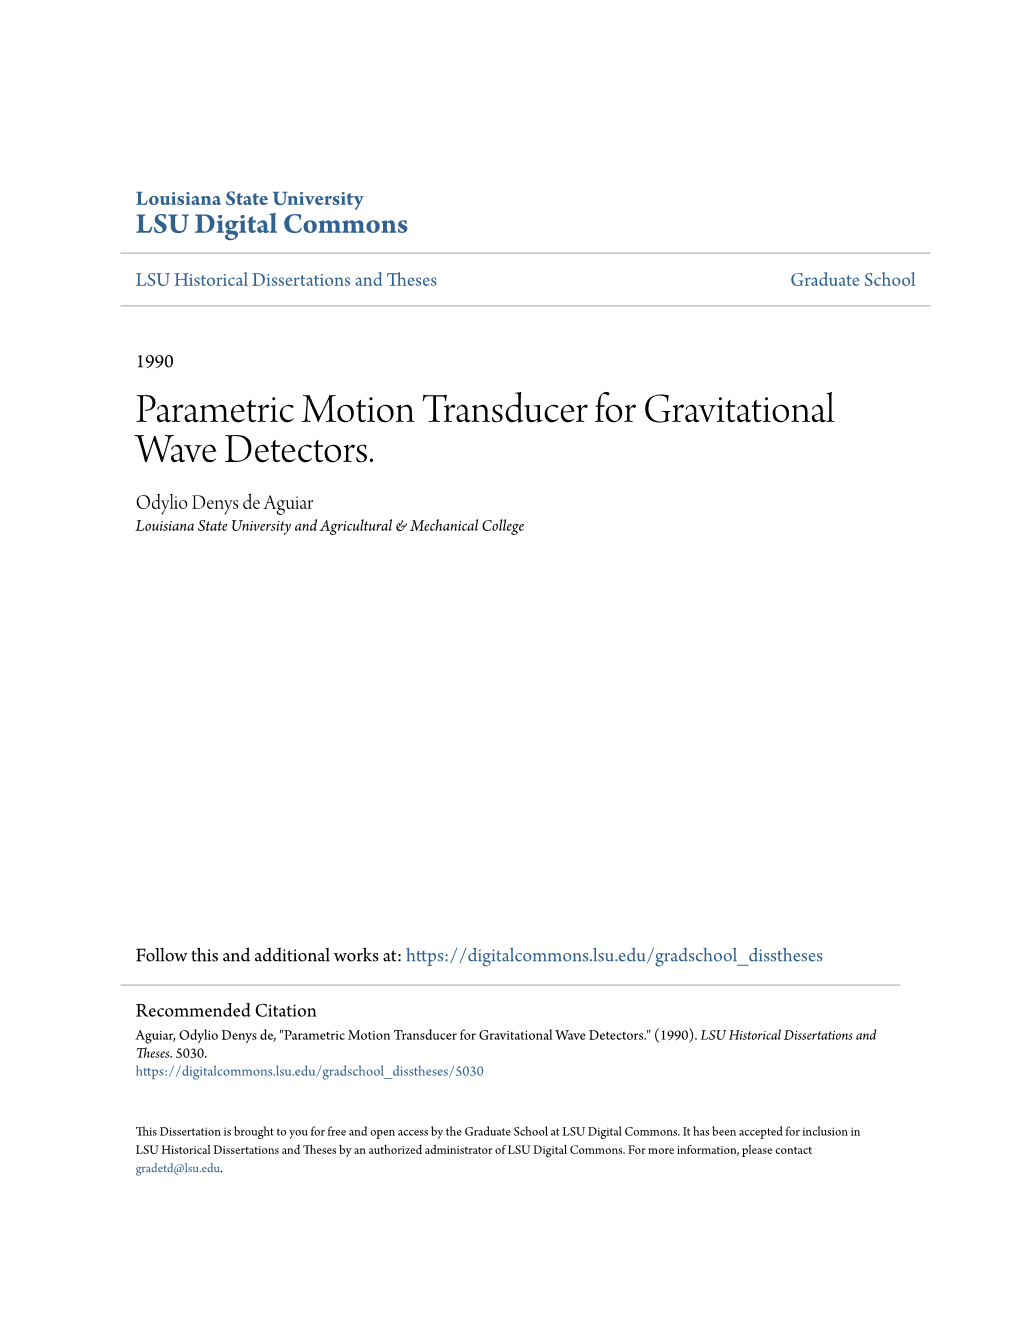 Parametric Motion Transducer for Gravitational Wave Detectors. Odylio Denys De Aguiar Louisiana State University and Agricultural & Mechanical College